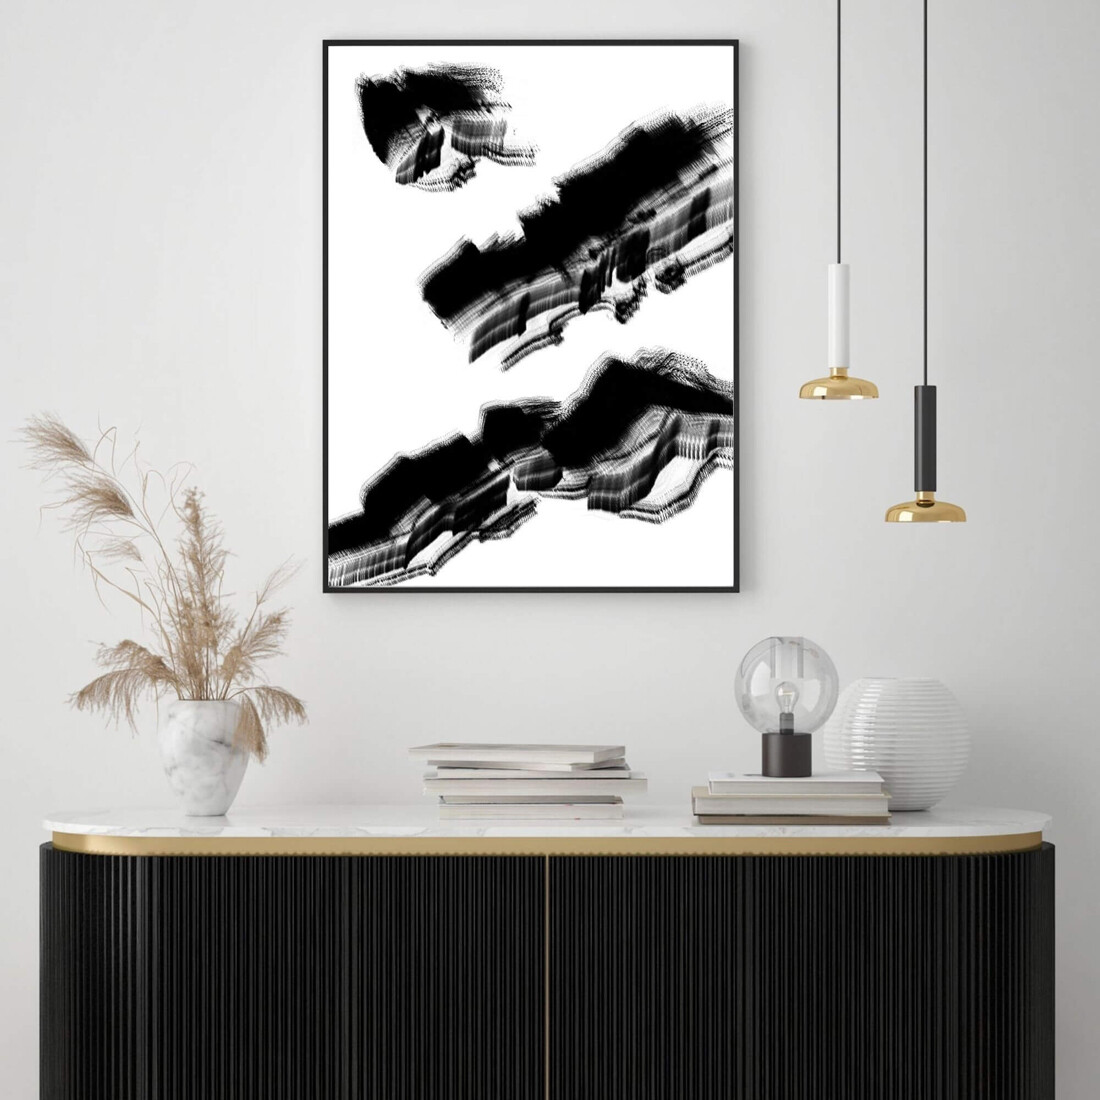 abstract art wall decor, Framed / Unframed / on Paper Canvas,, Size: Small 8 x 11 inch A4 Size, Medium: Fine Art Paper, No Frame or Framed: No Frame only Print